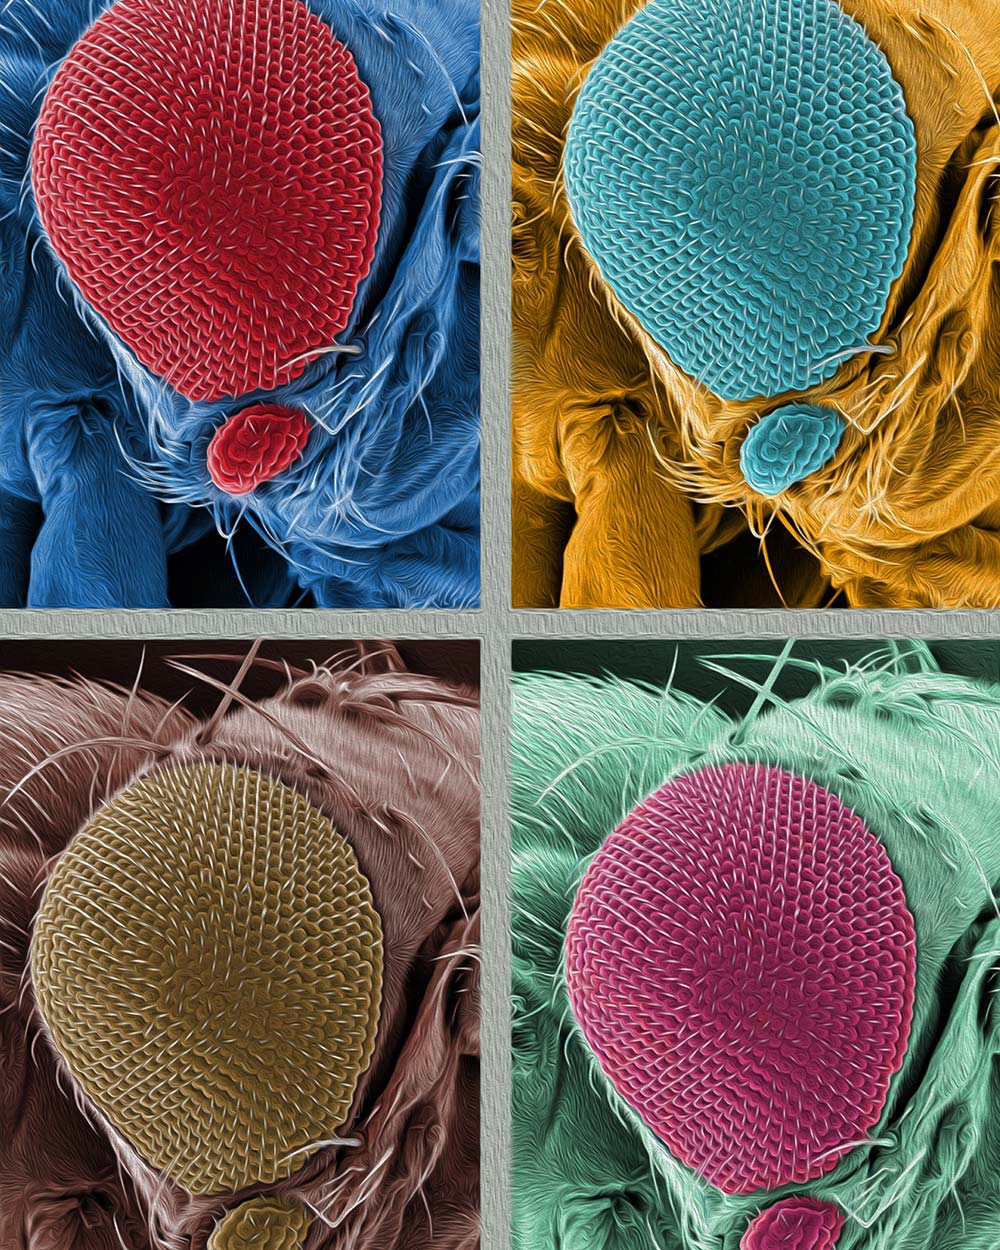 zoom in on a fly eye in 4 colors